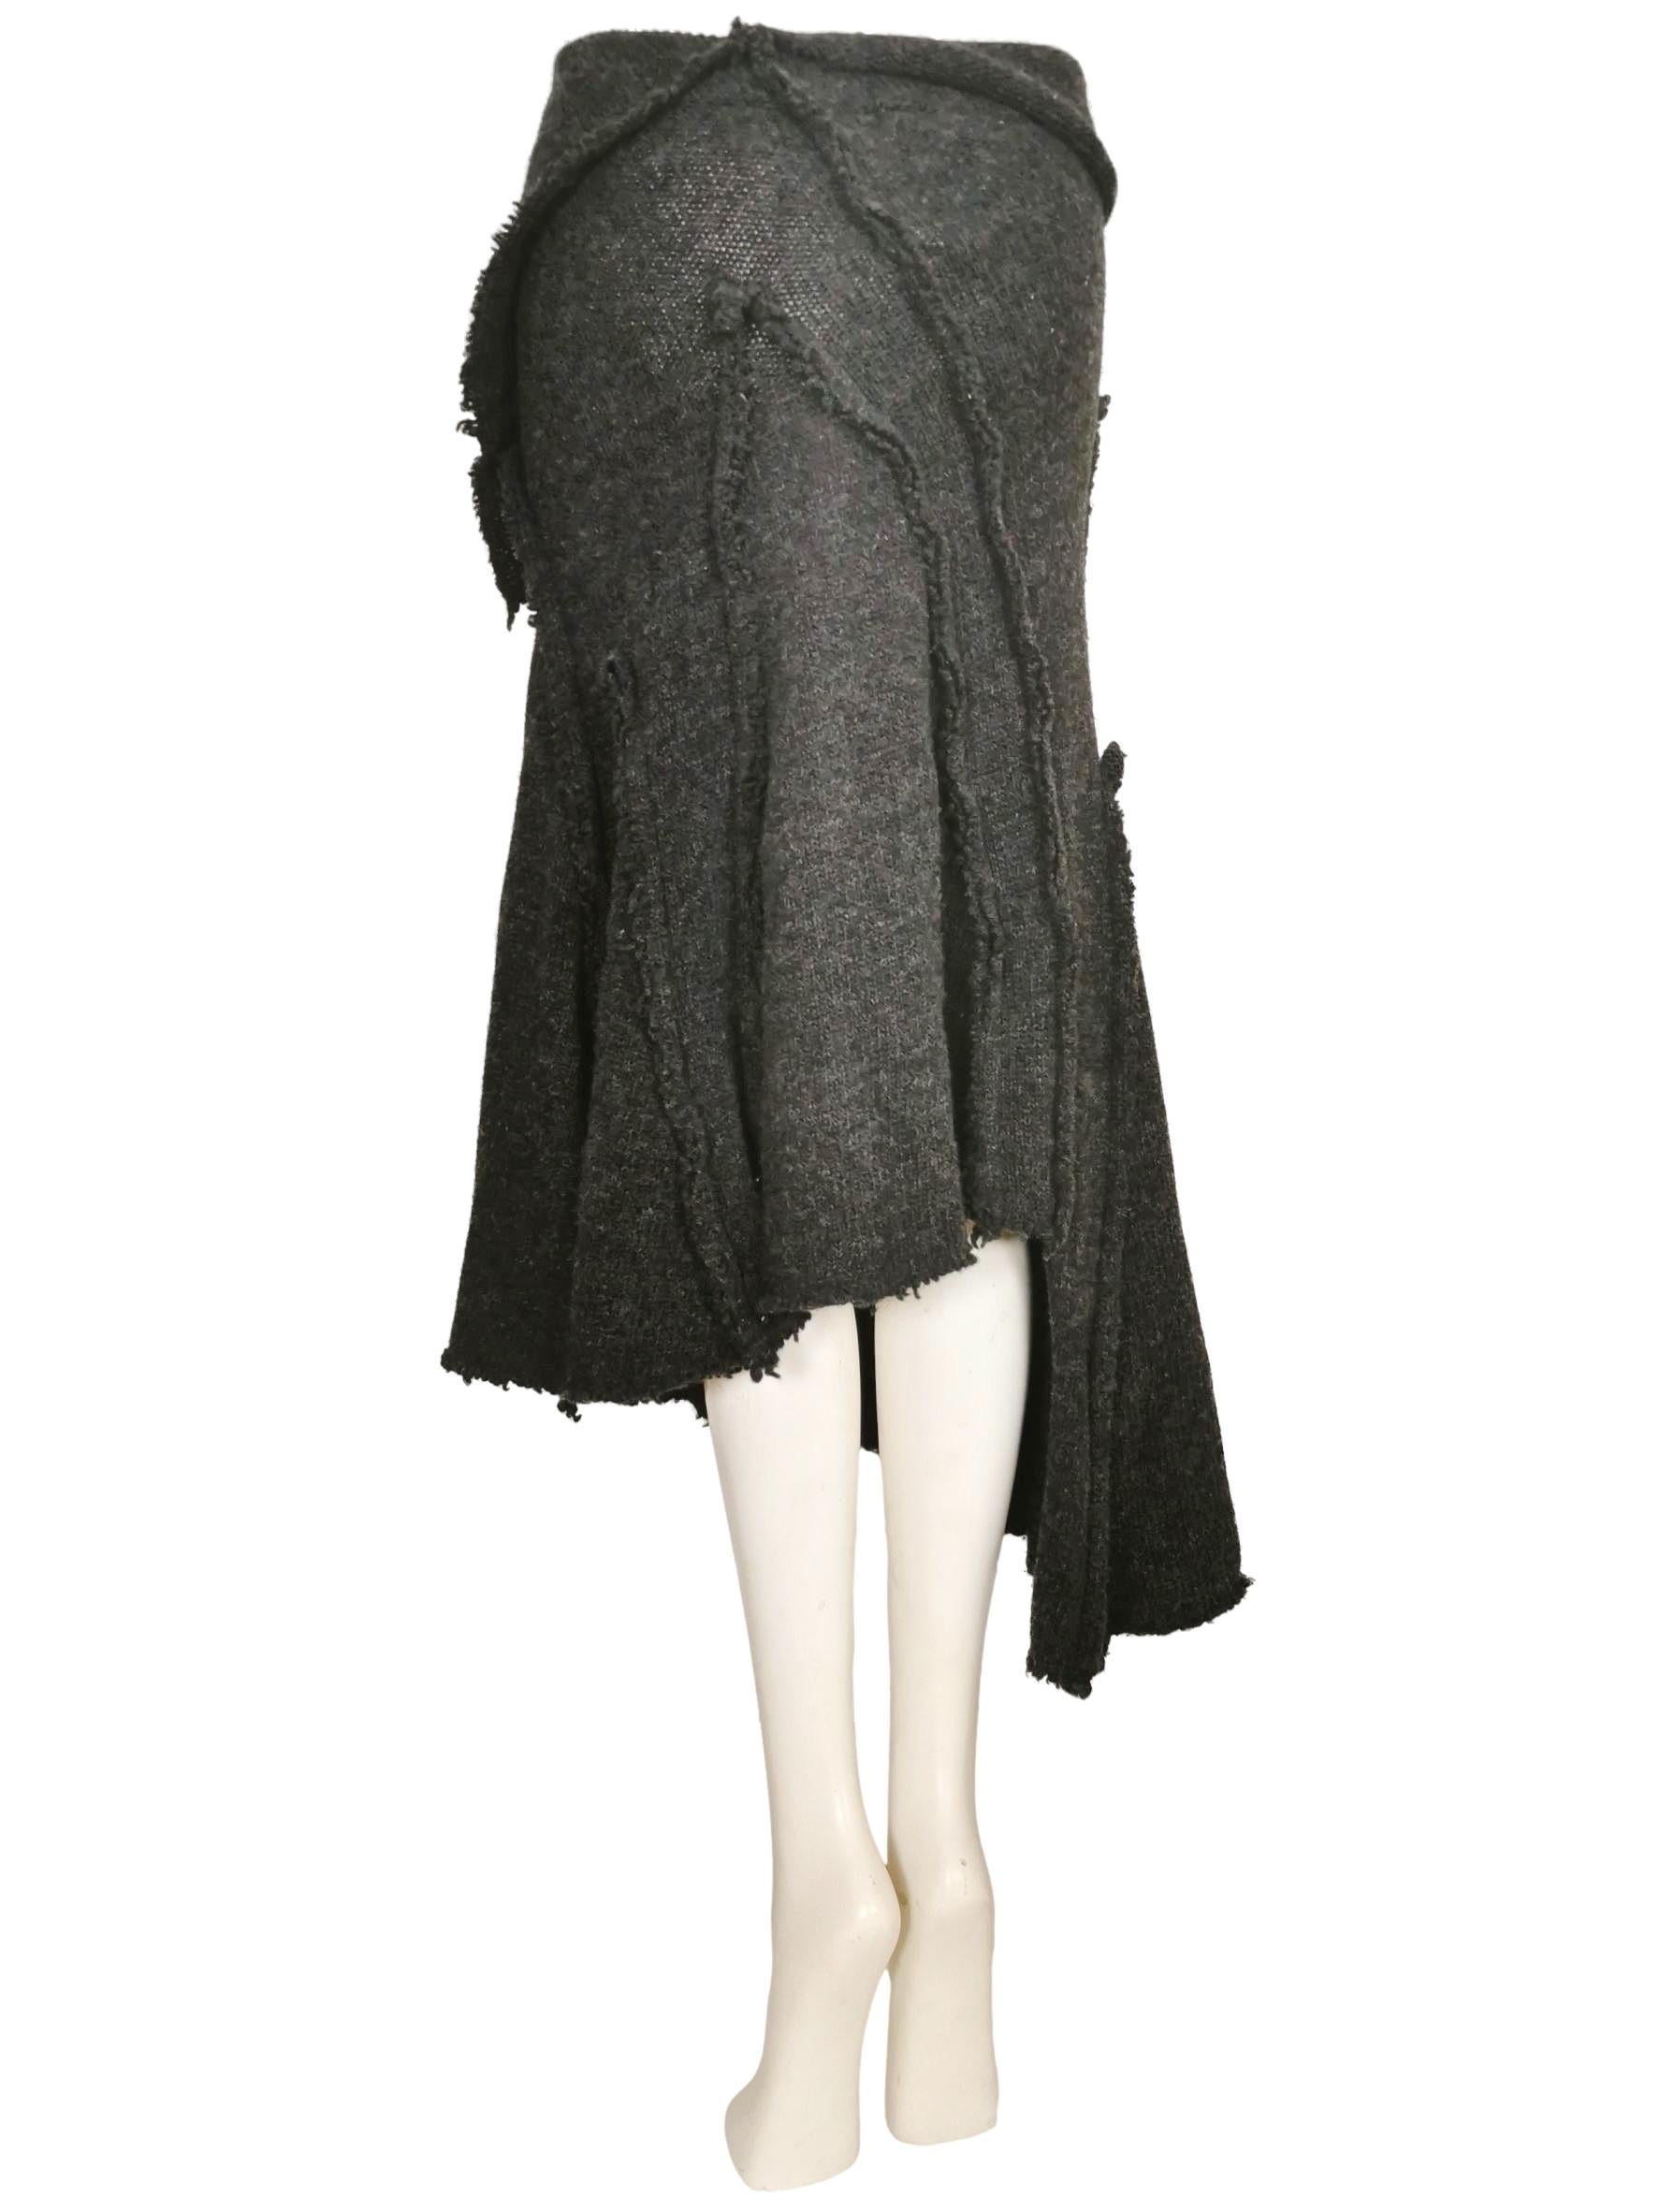 Comme des Garcons Wool Knit Raw Edge Skirt AD 2002 For Sale 11